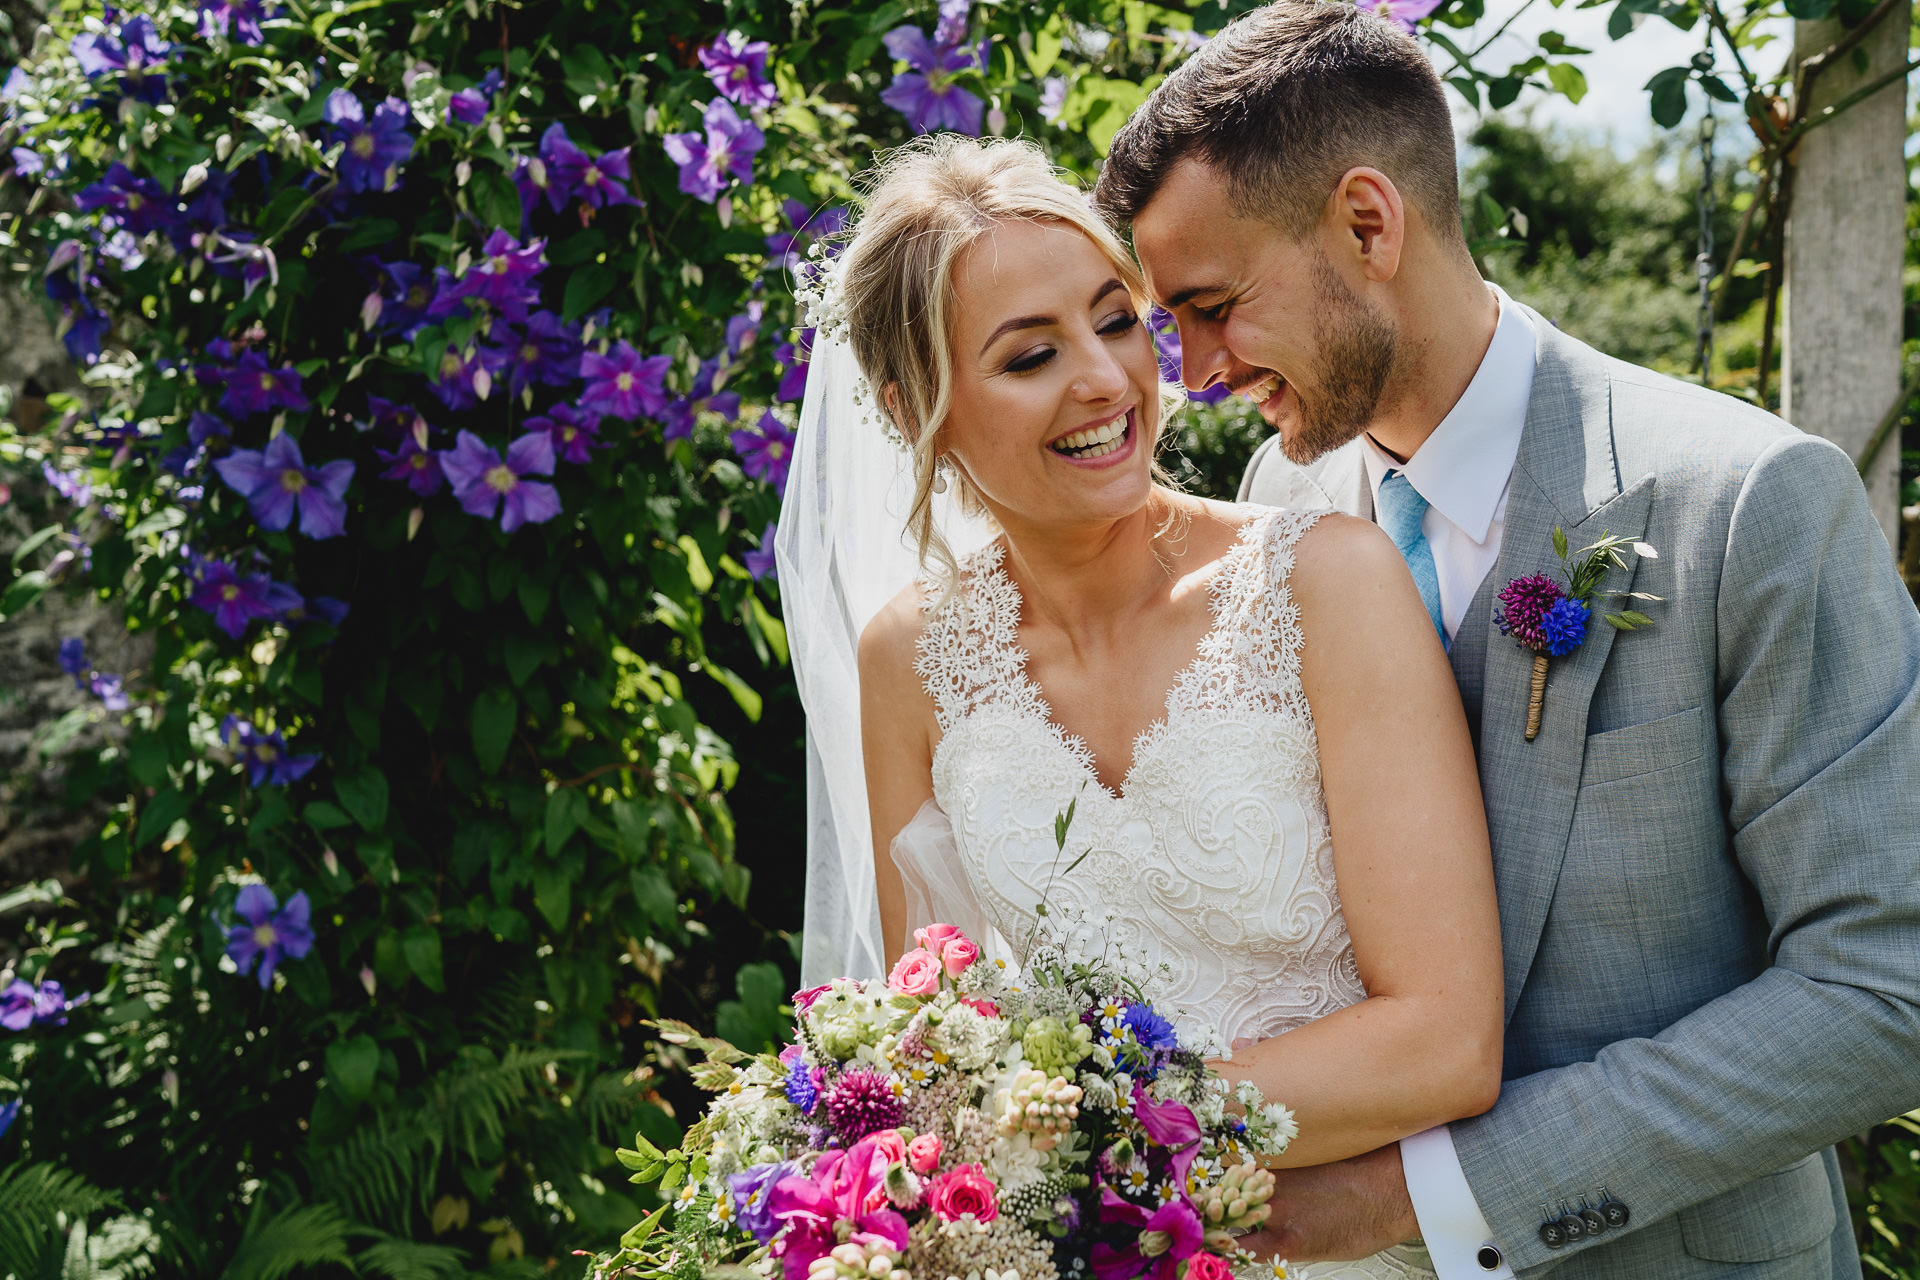 Bride and groom laughing together with purple flowers behind